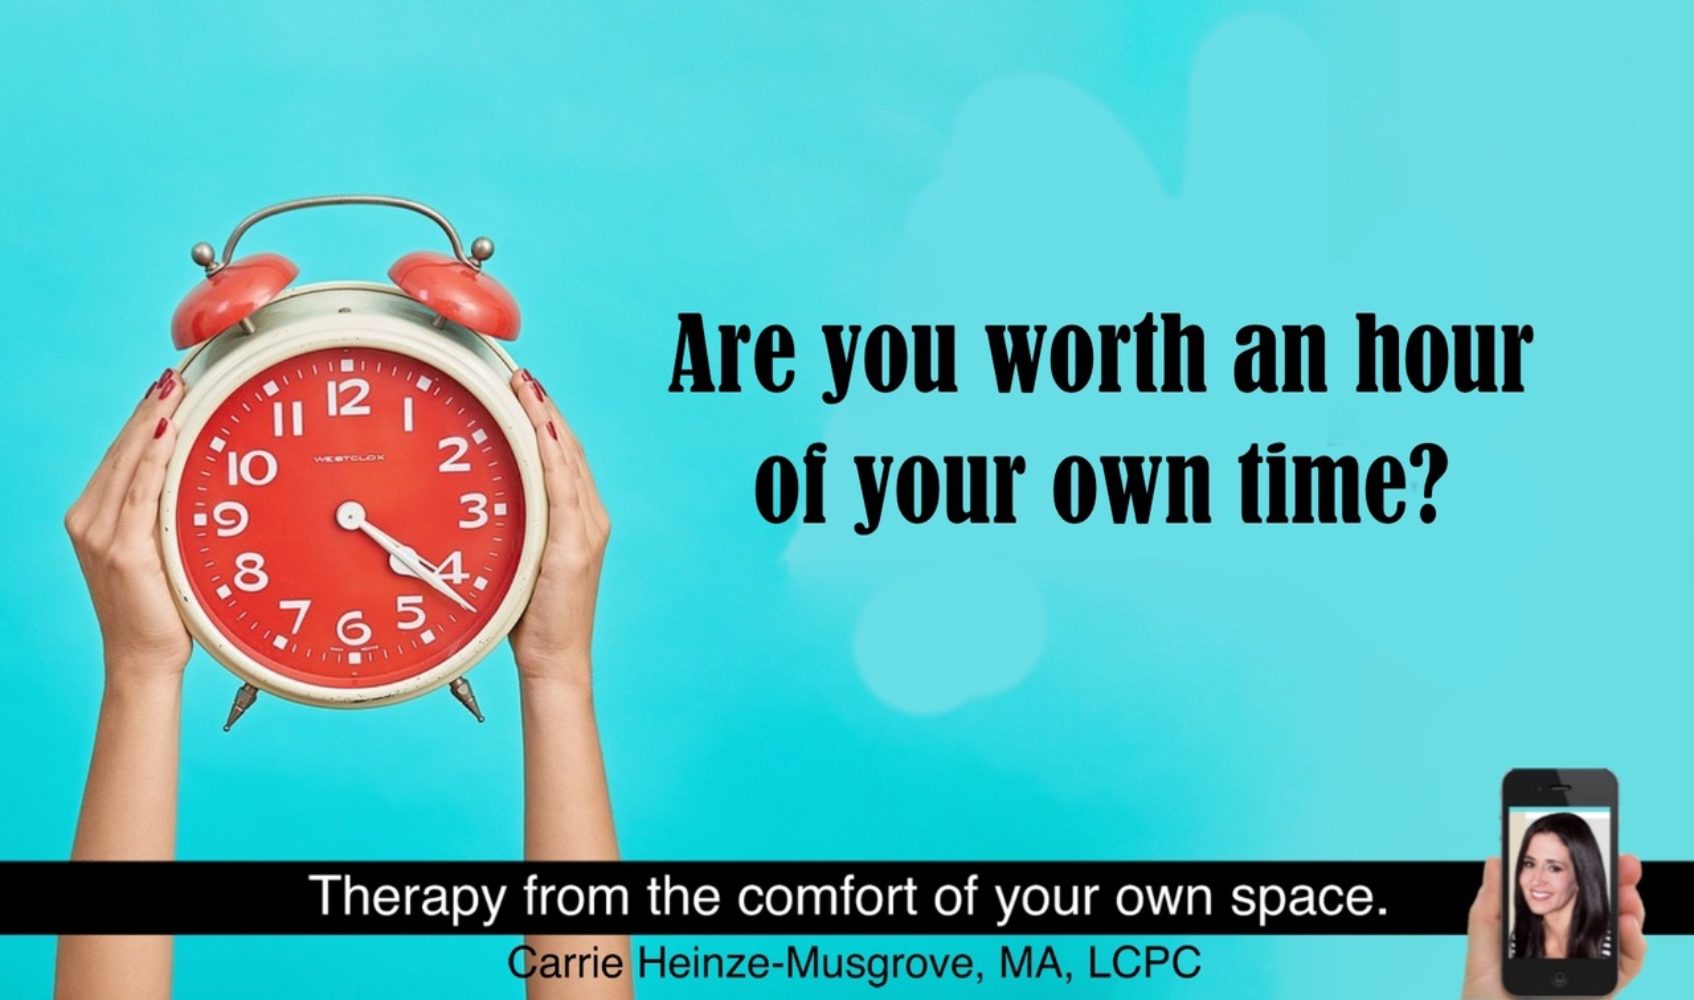 Are You Worth an Hour of Your Time?